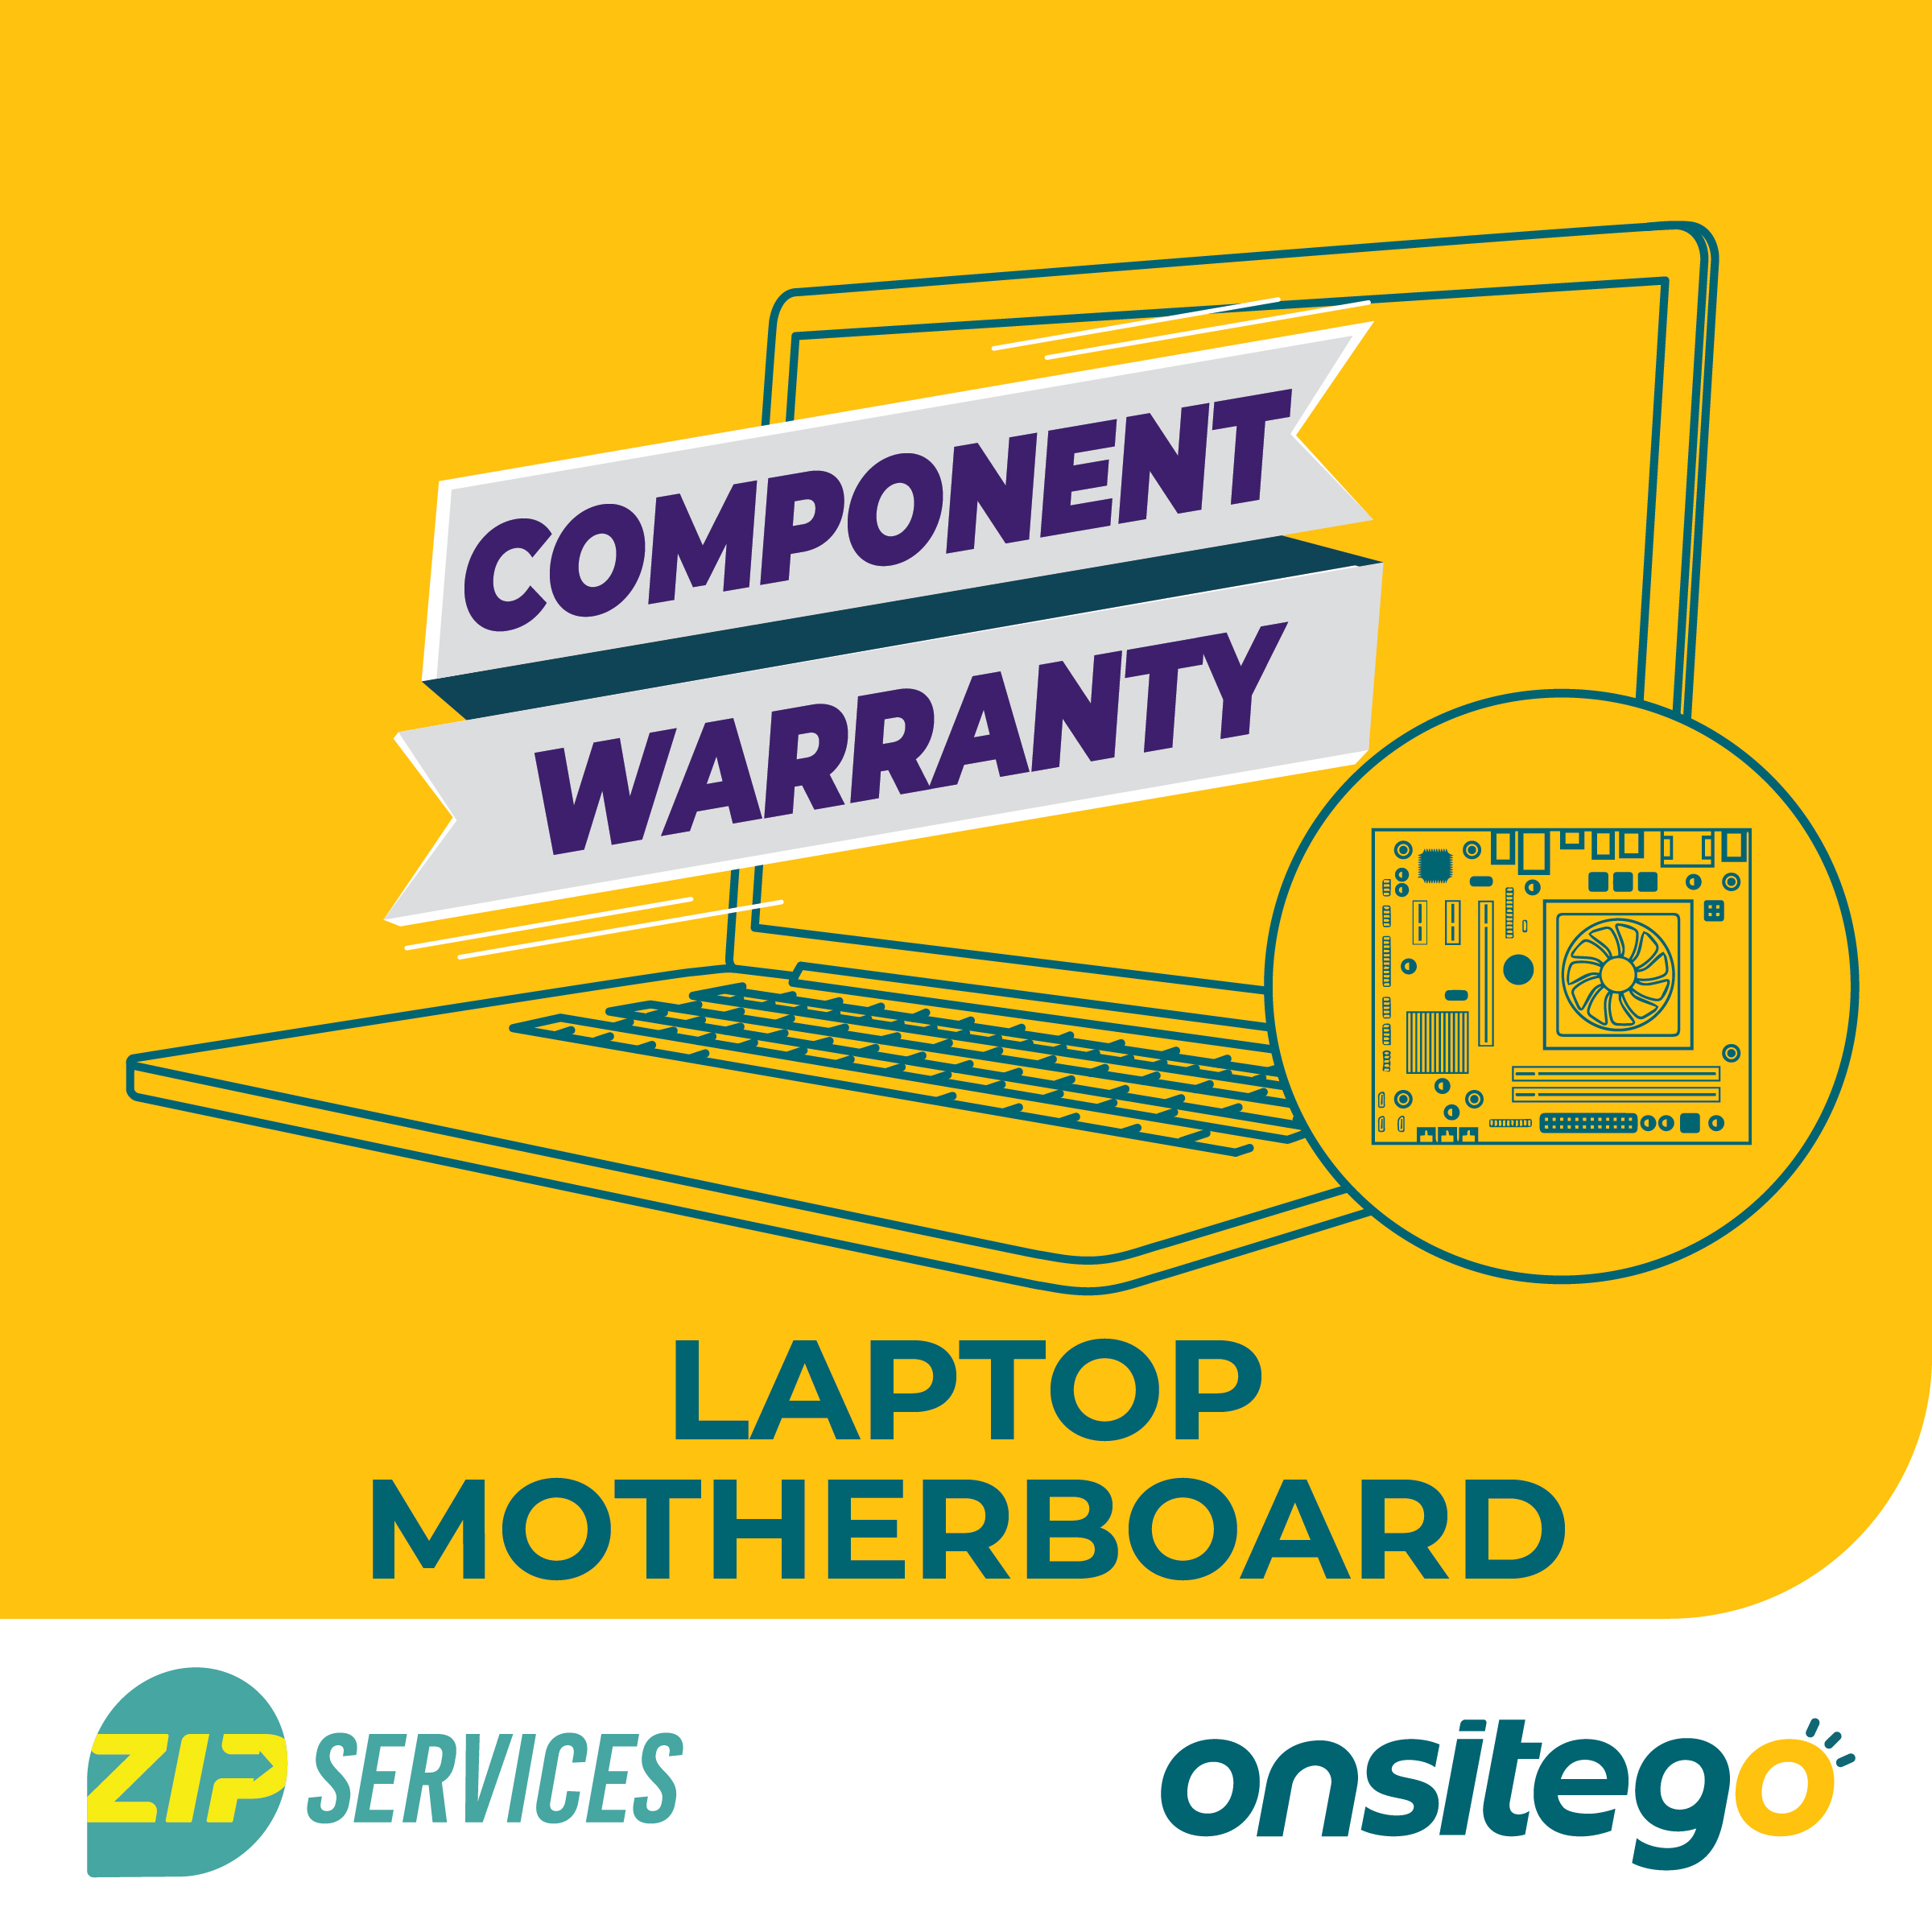 OnsiteGo 1 Year Extended Warranty for Motherboard Rs. 200000 - Rs.2500000_1